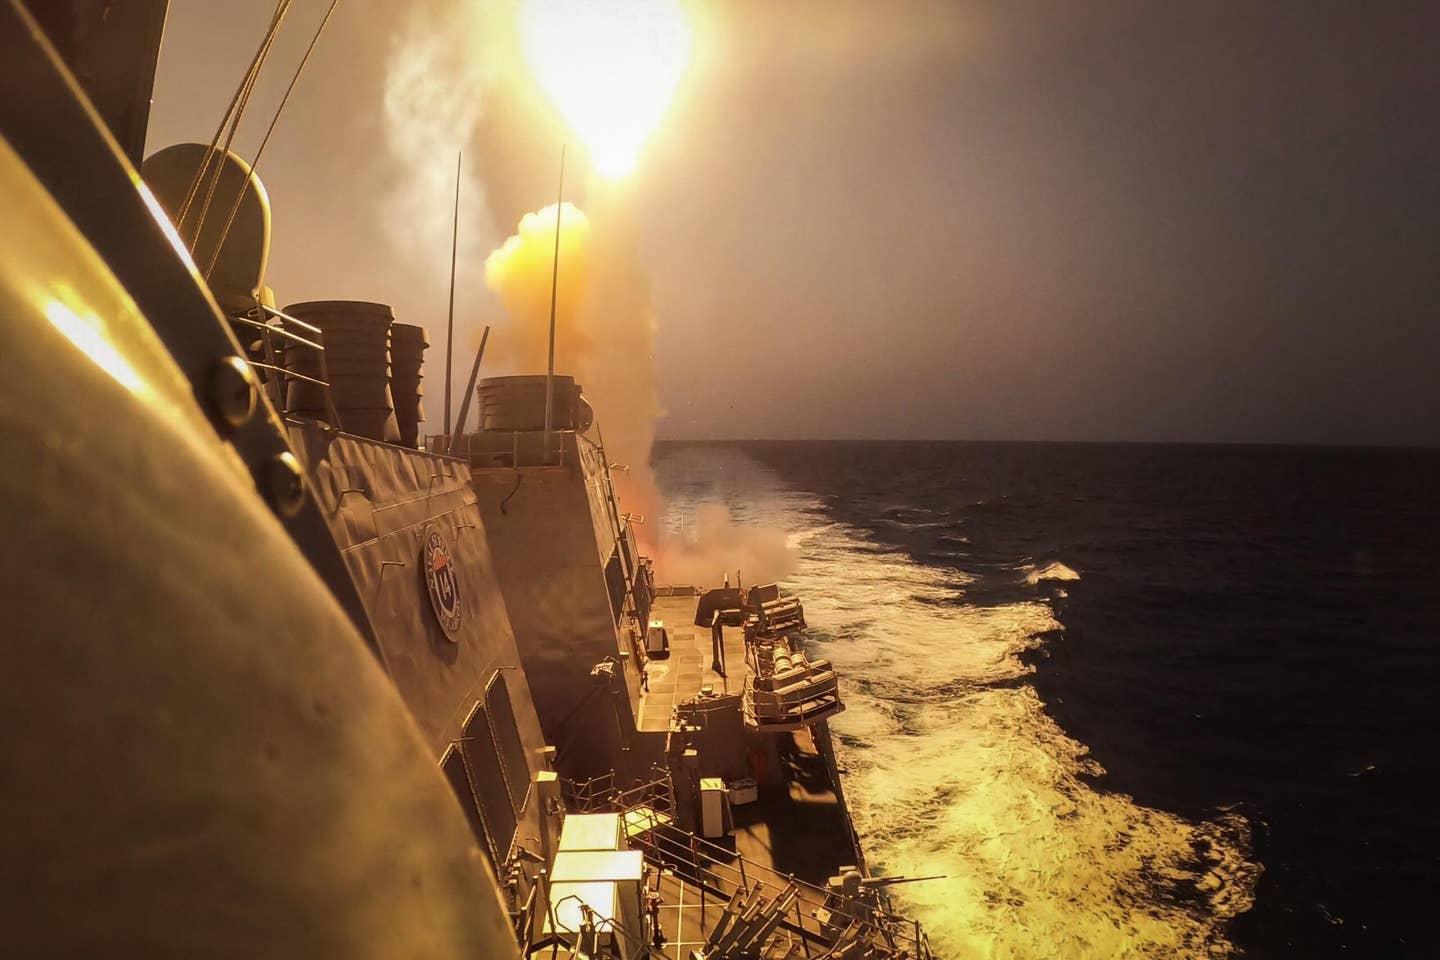 RED SEA (Oct. 19, 2023) The Arleigh Burke-class guided-missile destroyer USS Carney (DDG 64) fires a Standard Missile (SM) 2 to defeat a combination of Houthi missiles and unmanned aerial vehicles in the Red Sea, Oct. 19, 2023. Carney is deployed to the U.S. 5th Fleet area of operations to help ensure maritime security and stability in the Middle East region. (U.S. Navy photo by Mass Communication Specialist 2nd Class Aaron Lau)